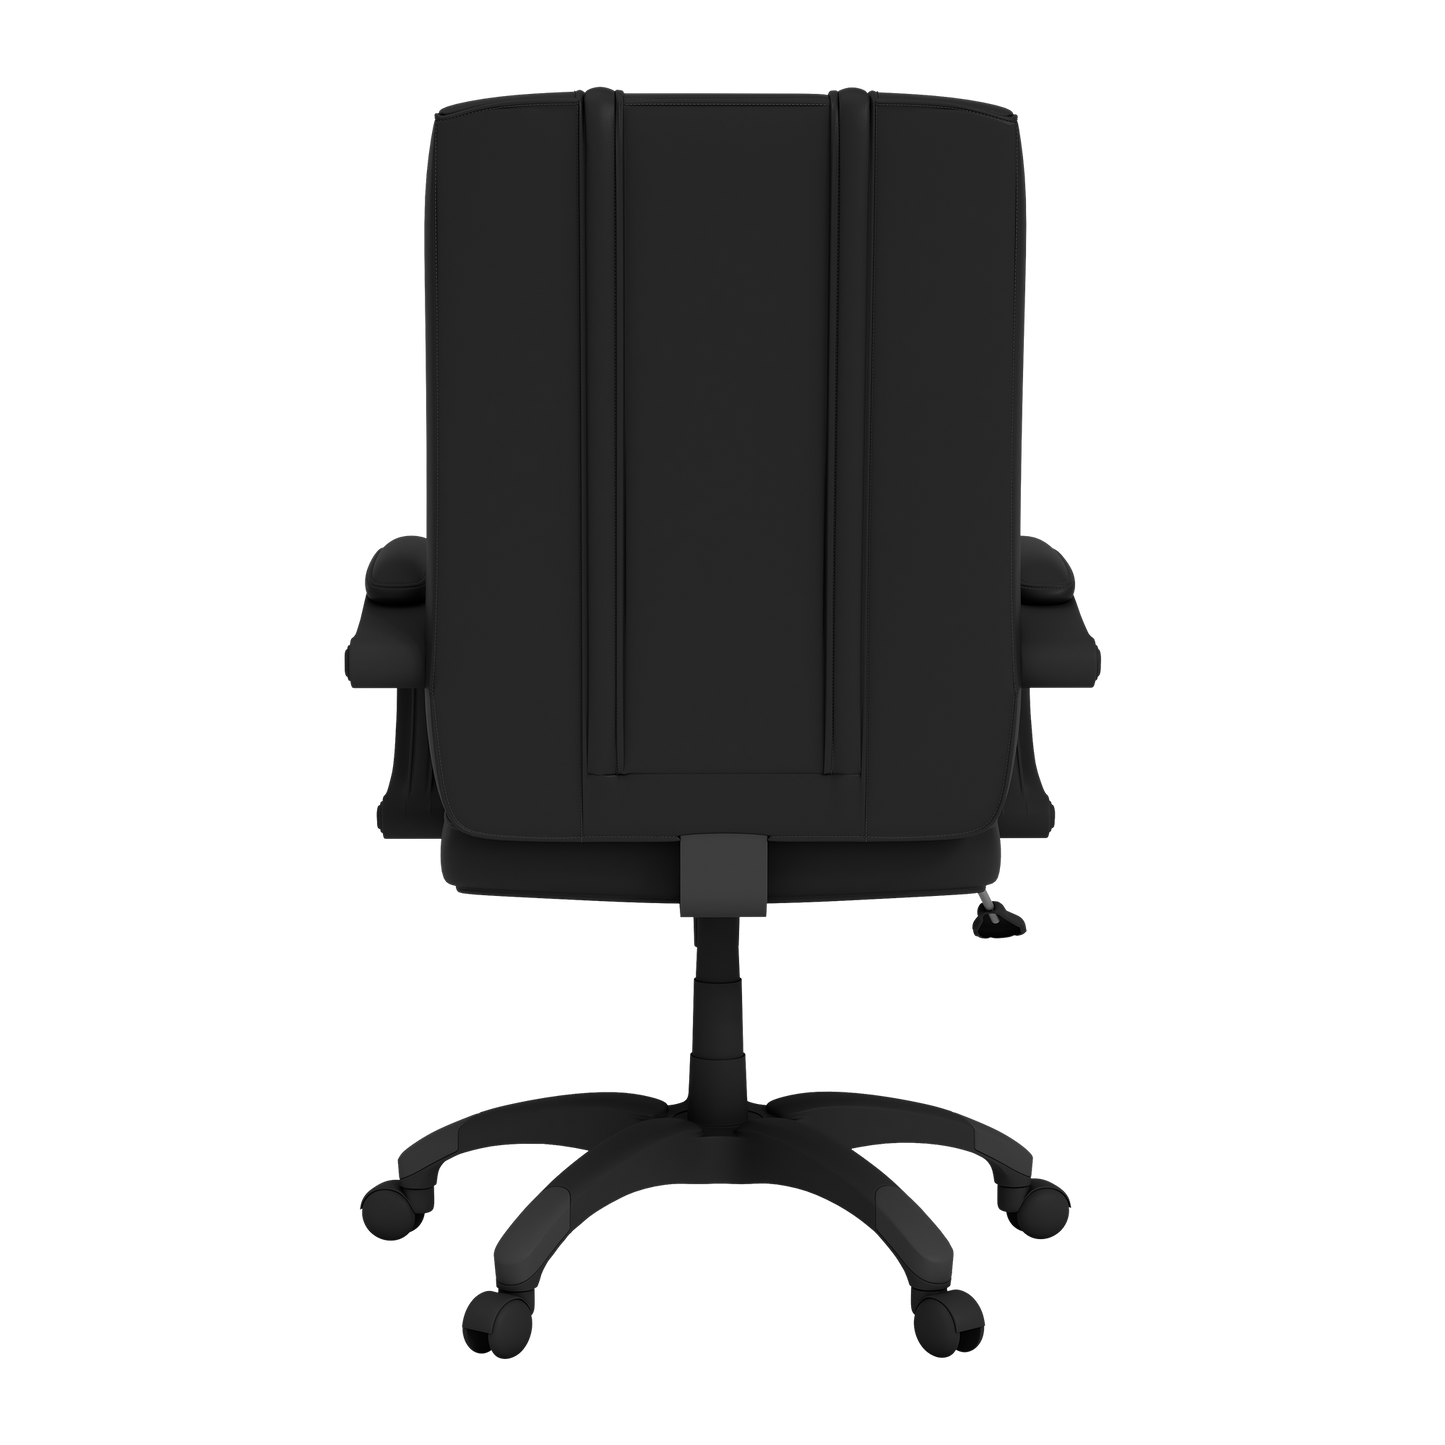 Office Chair 1000 with  Indianapolis Colts Helmet Logo